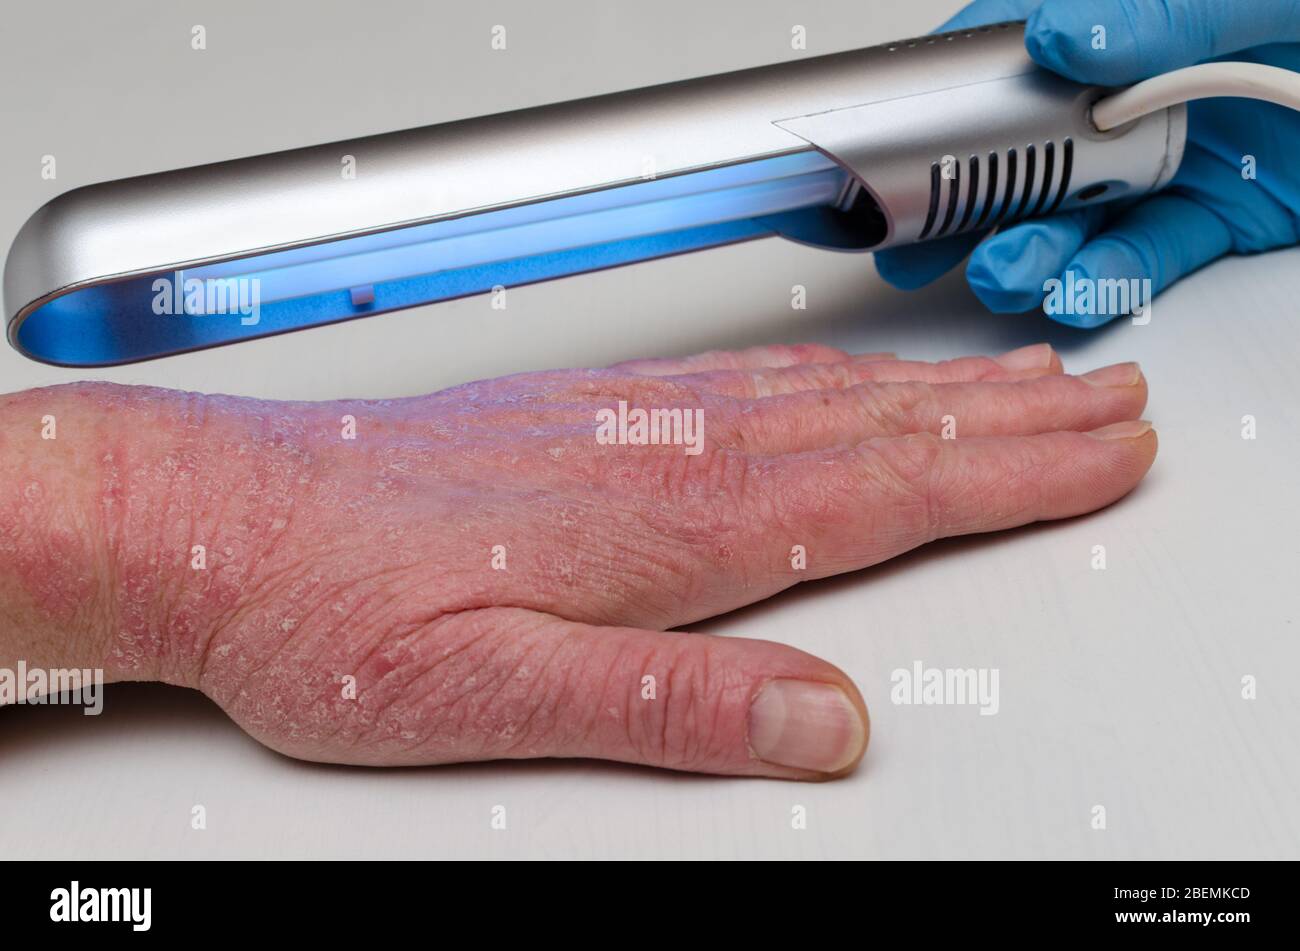 Treatment of skin diseases with narrow-band ultraviolet with a wavelength of 311 nm Stock Photo